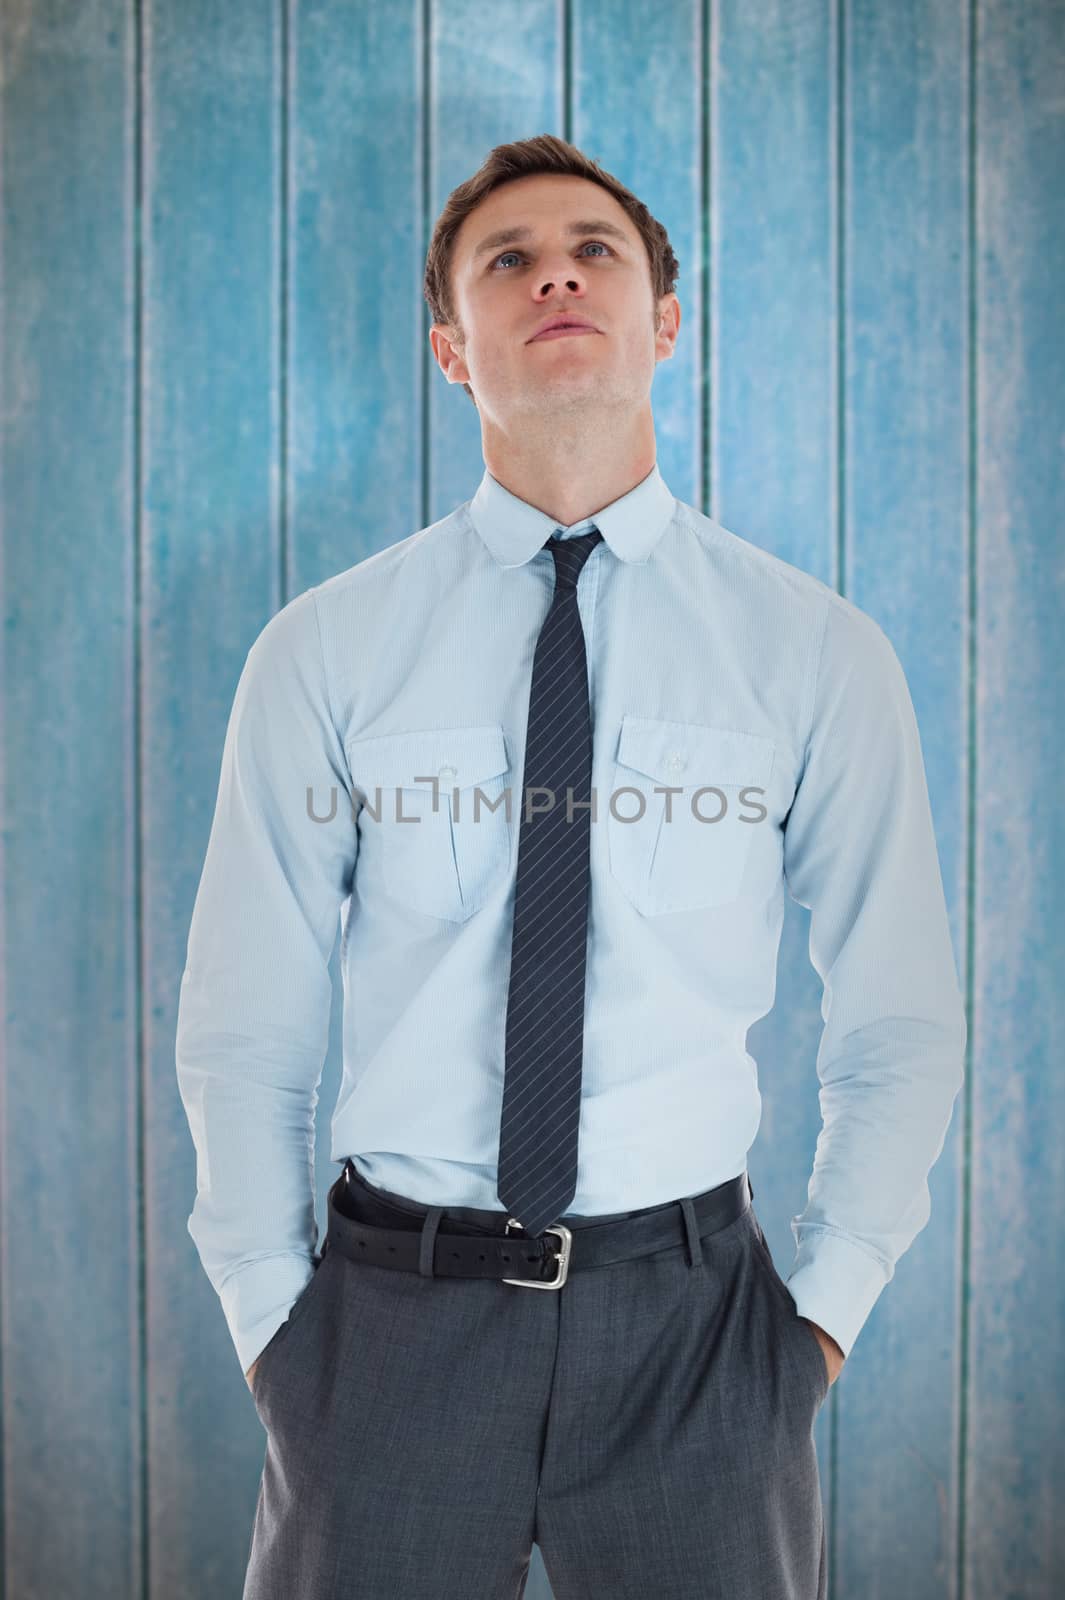 Serious businessman standing with hands in pockets against wooden planks